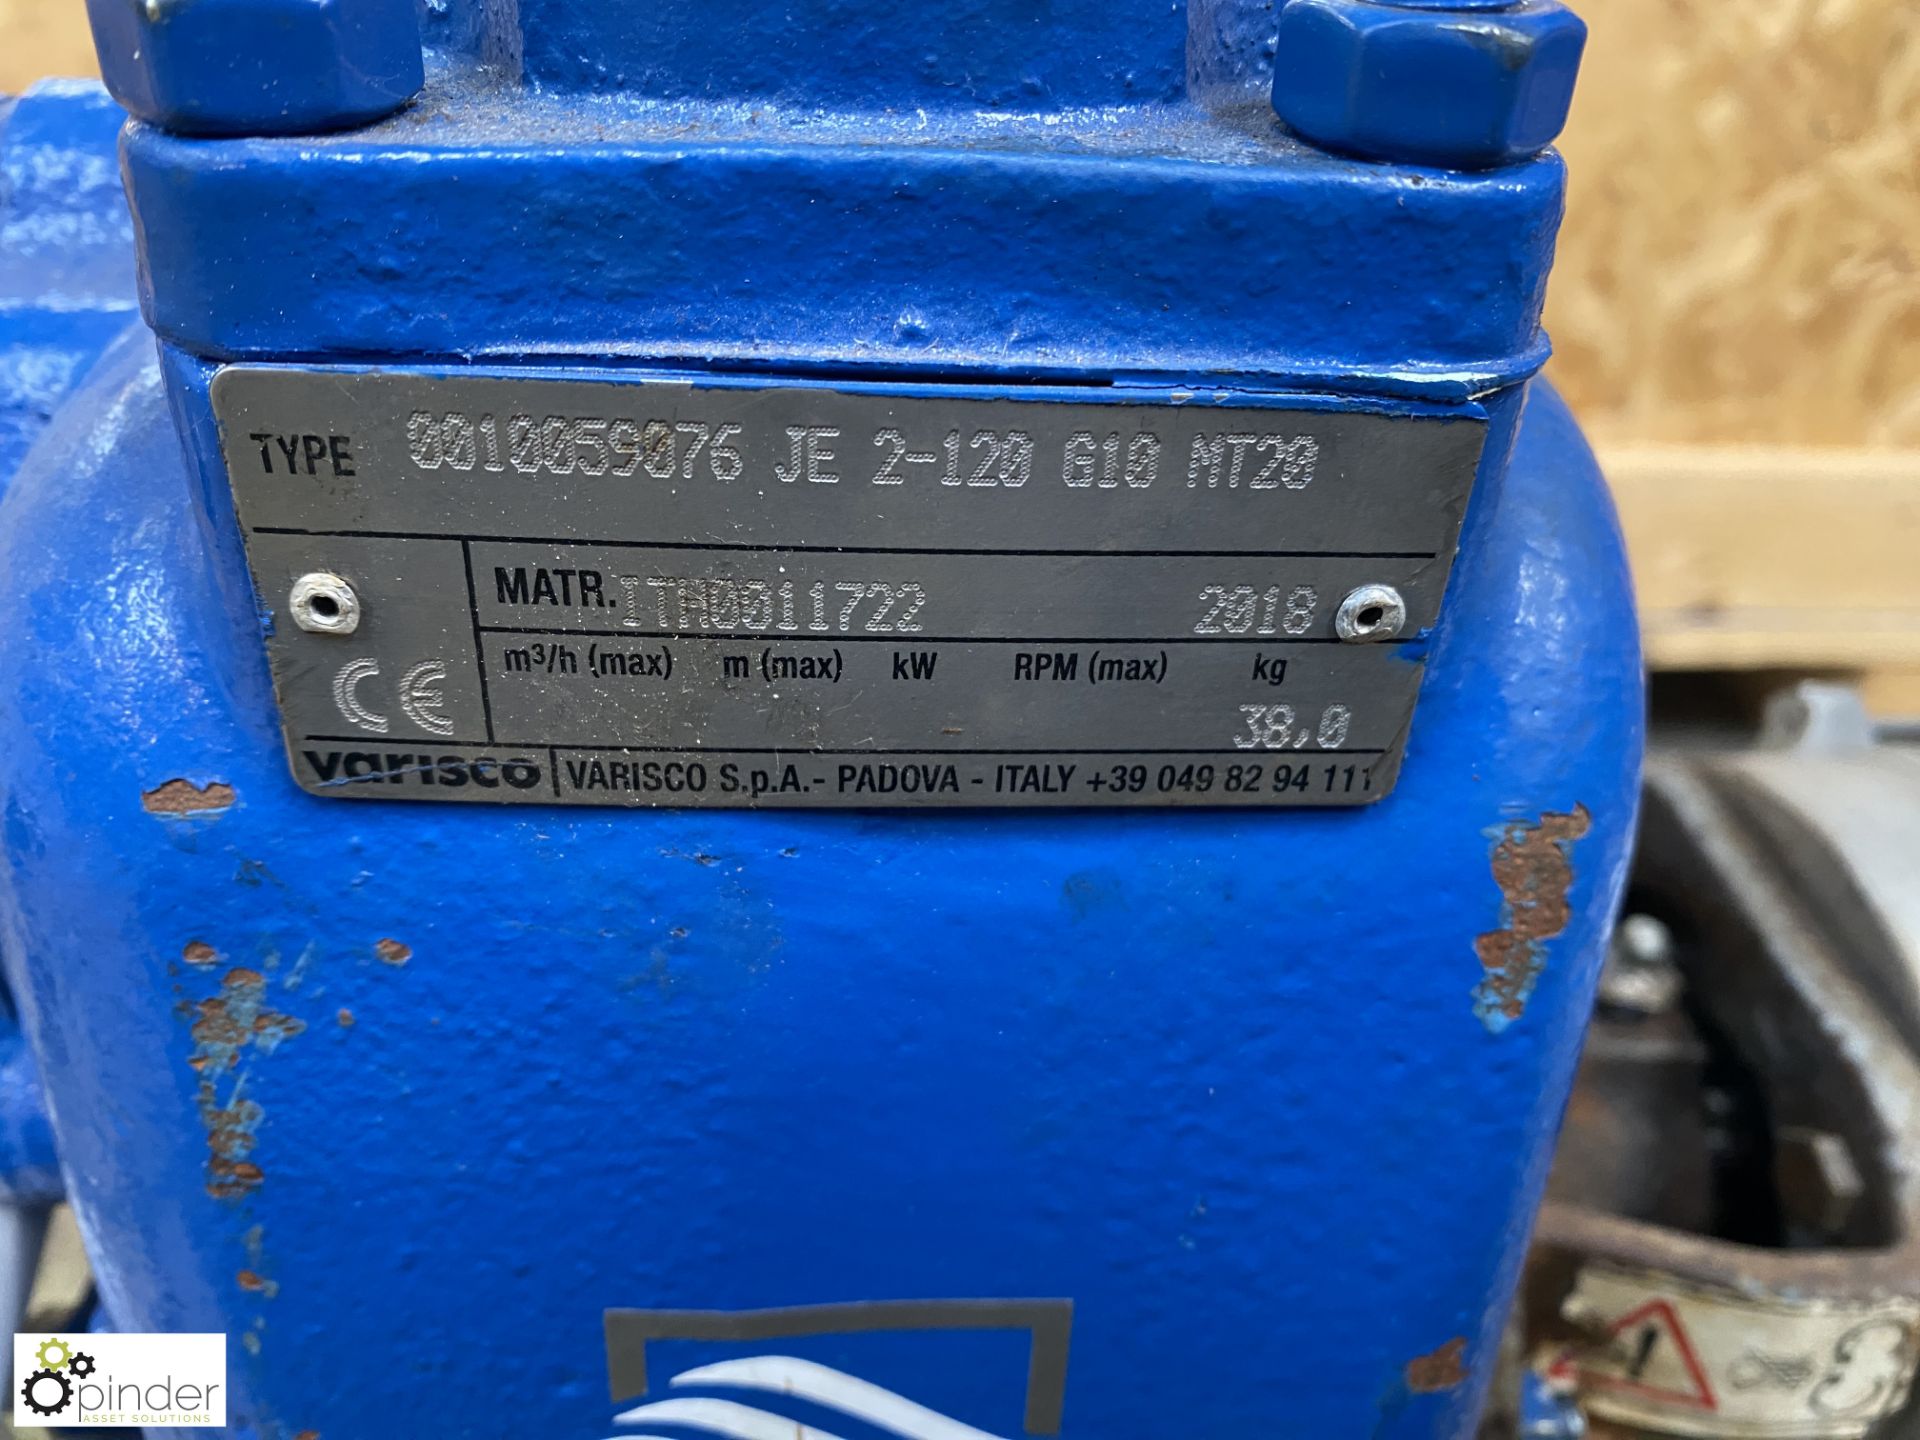 Varisco 0010059076 JE2-120 G10MT20 Pump, year 2017, with 2.2kw electric motor, 284rpm (Location - Image 3 of 5